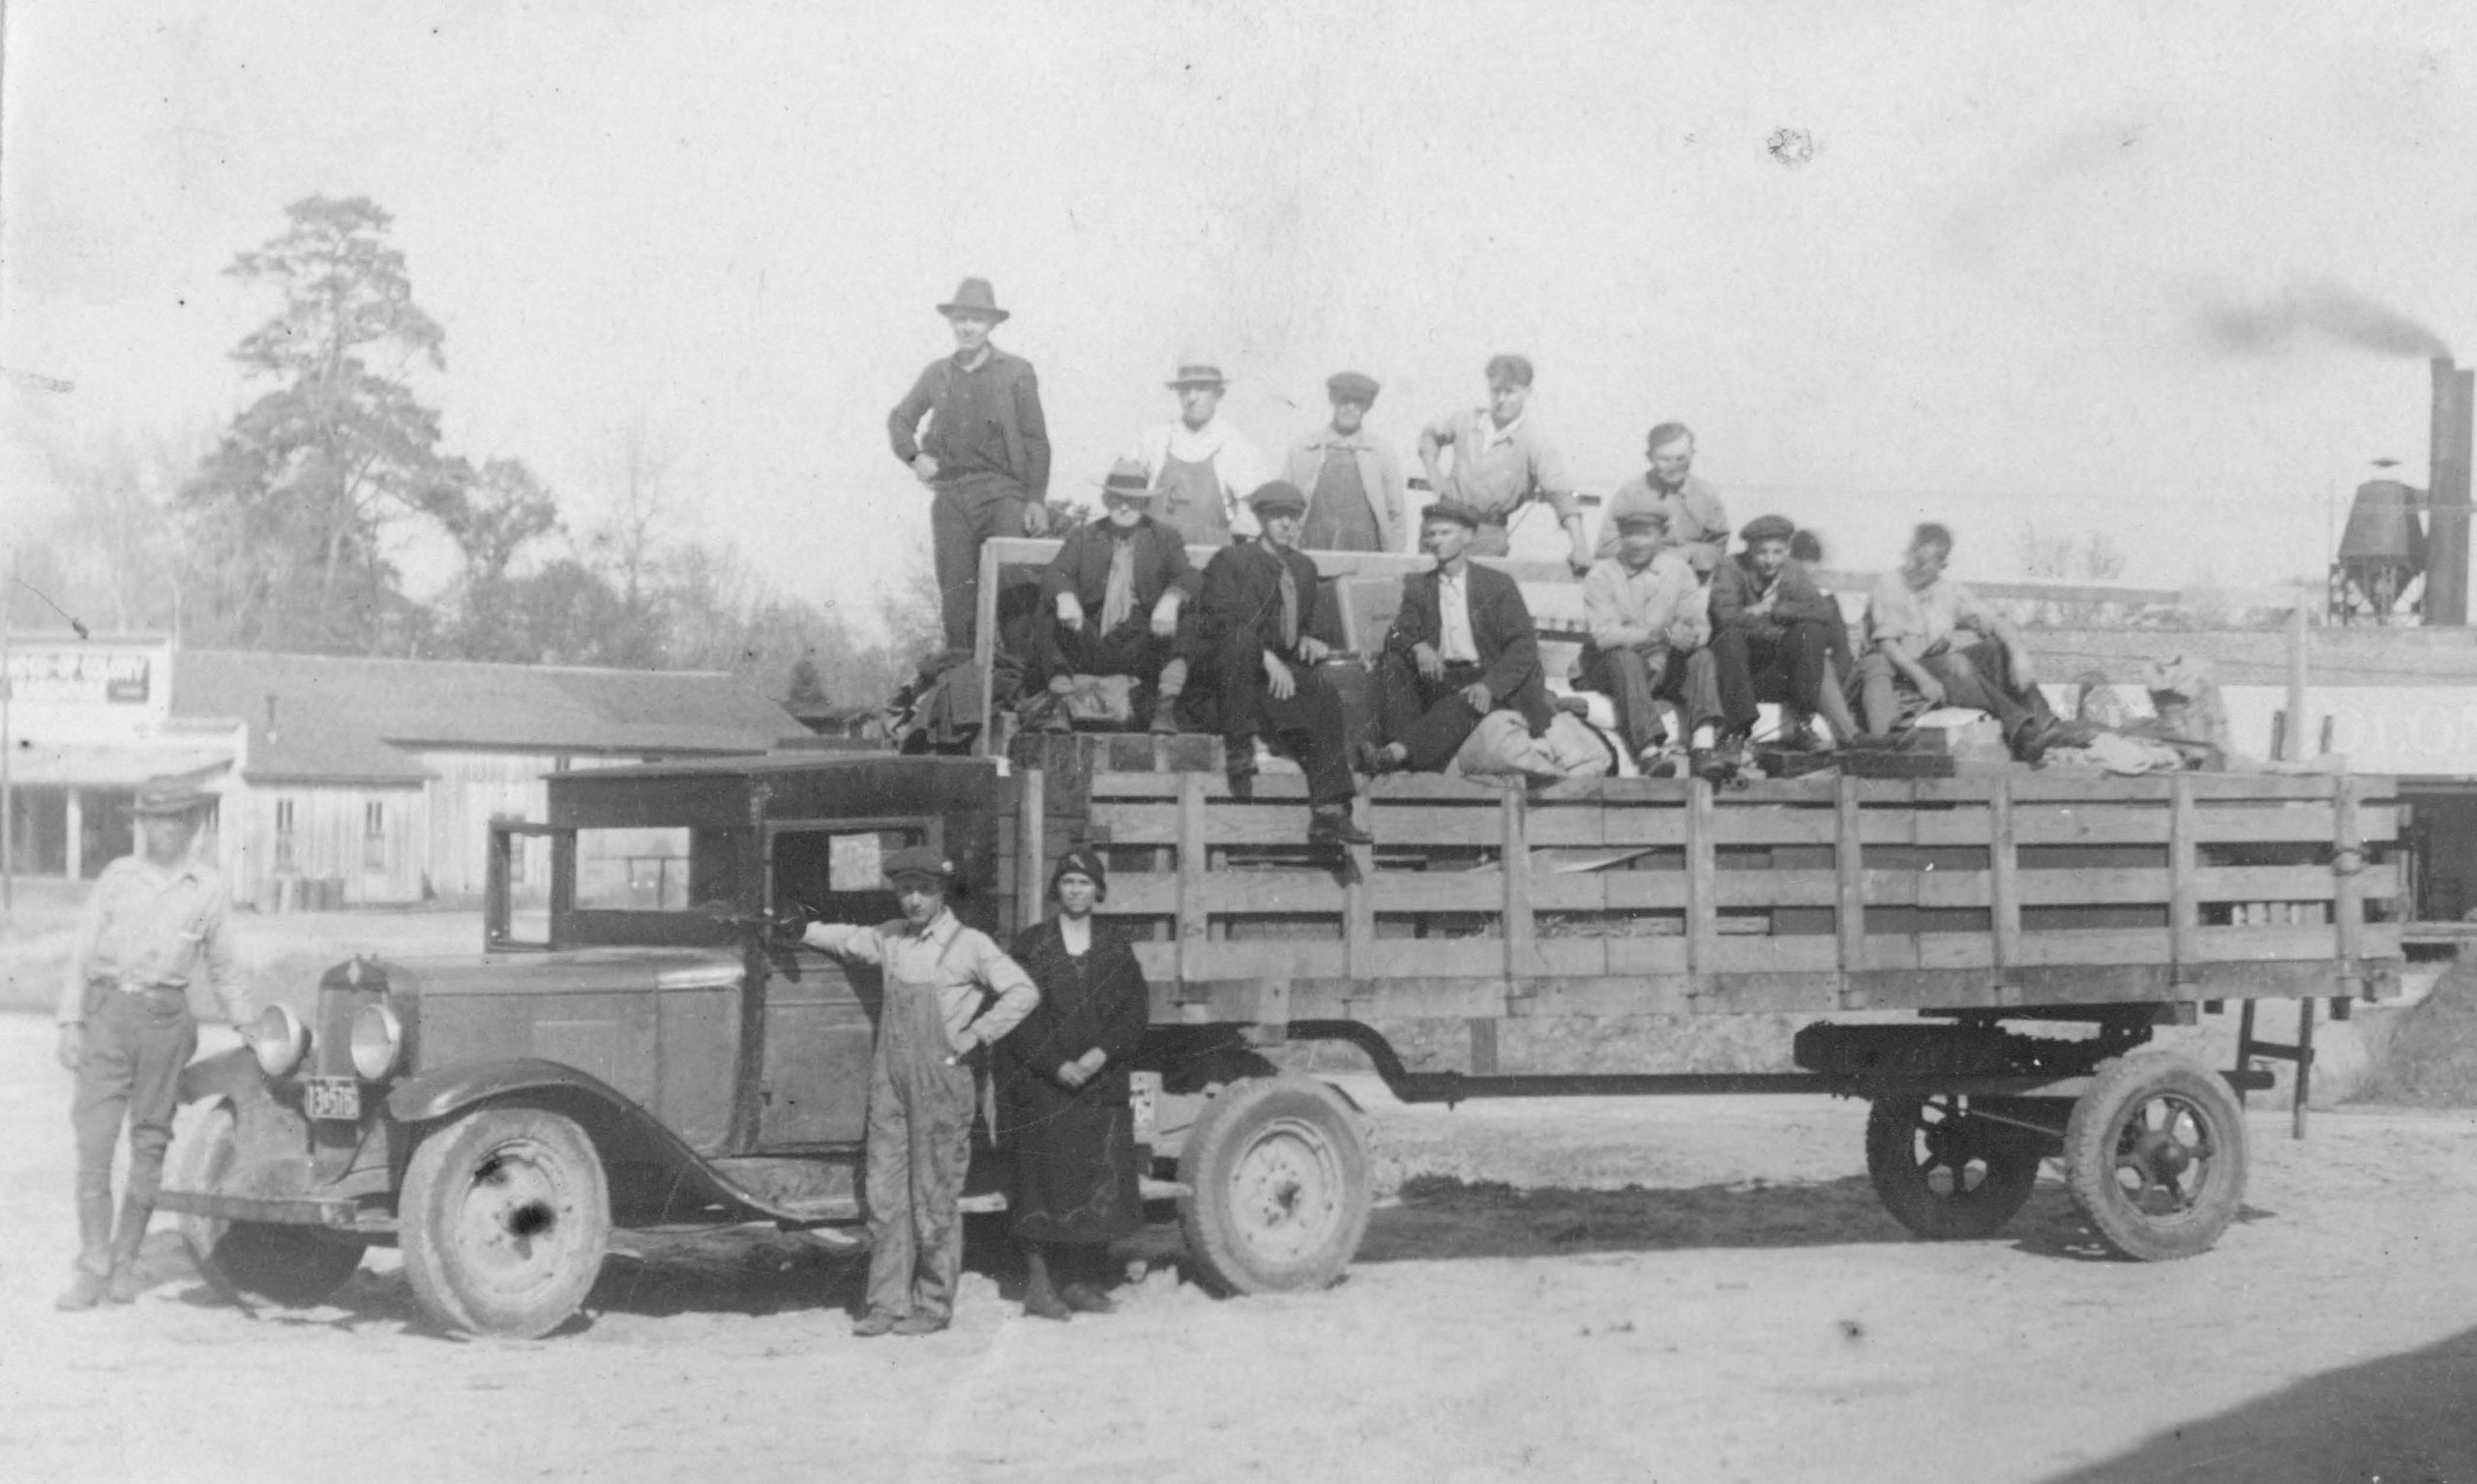 Grayscaled photograph of a group of people standing on bed of truck circa 1933